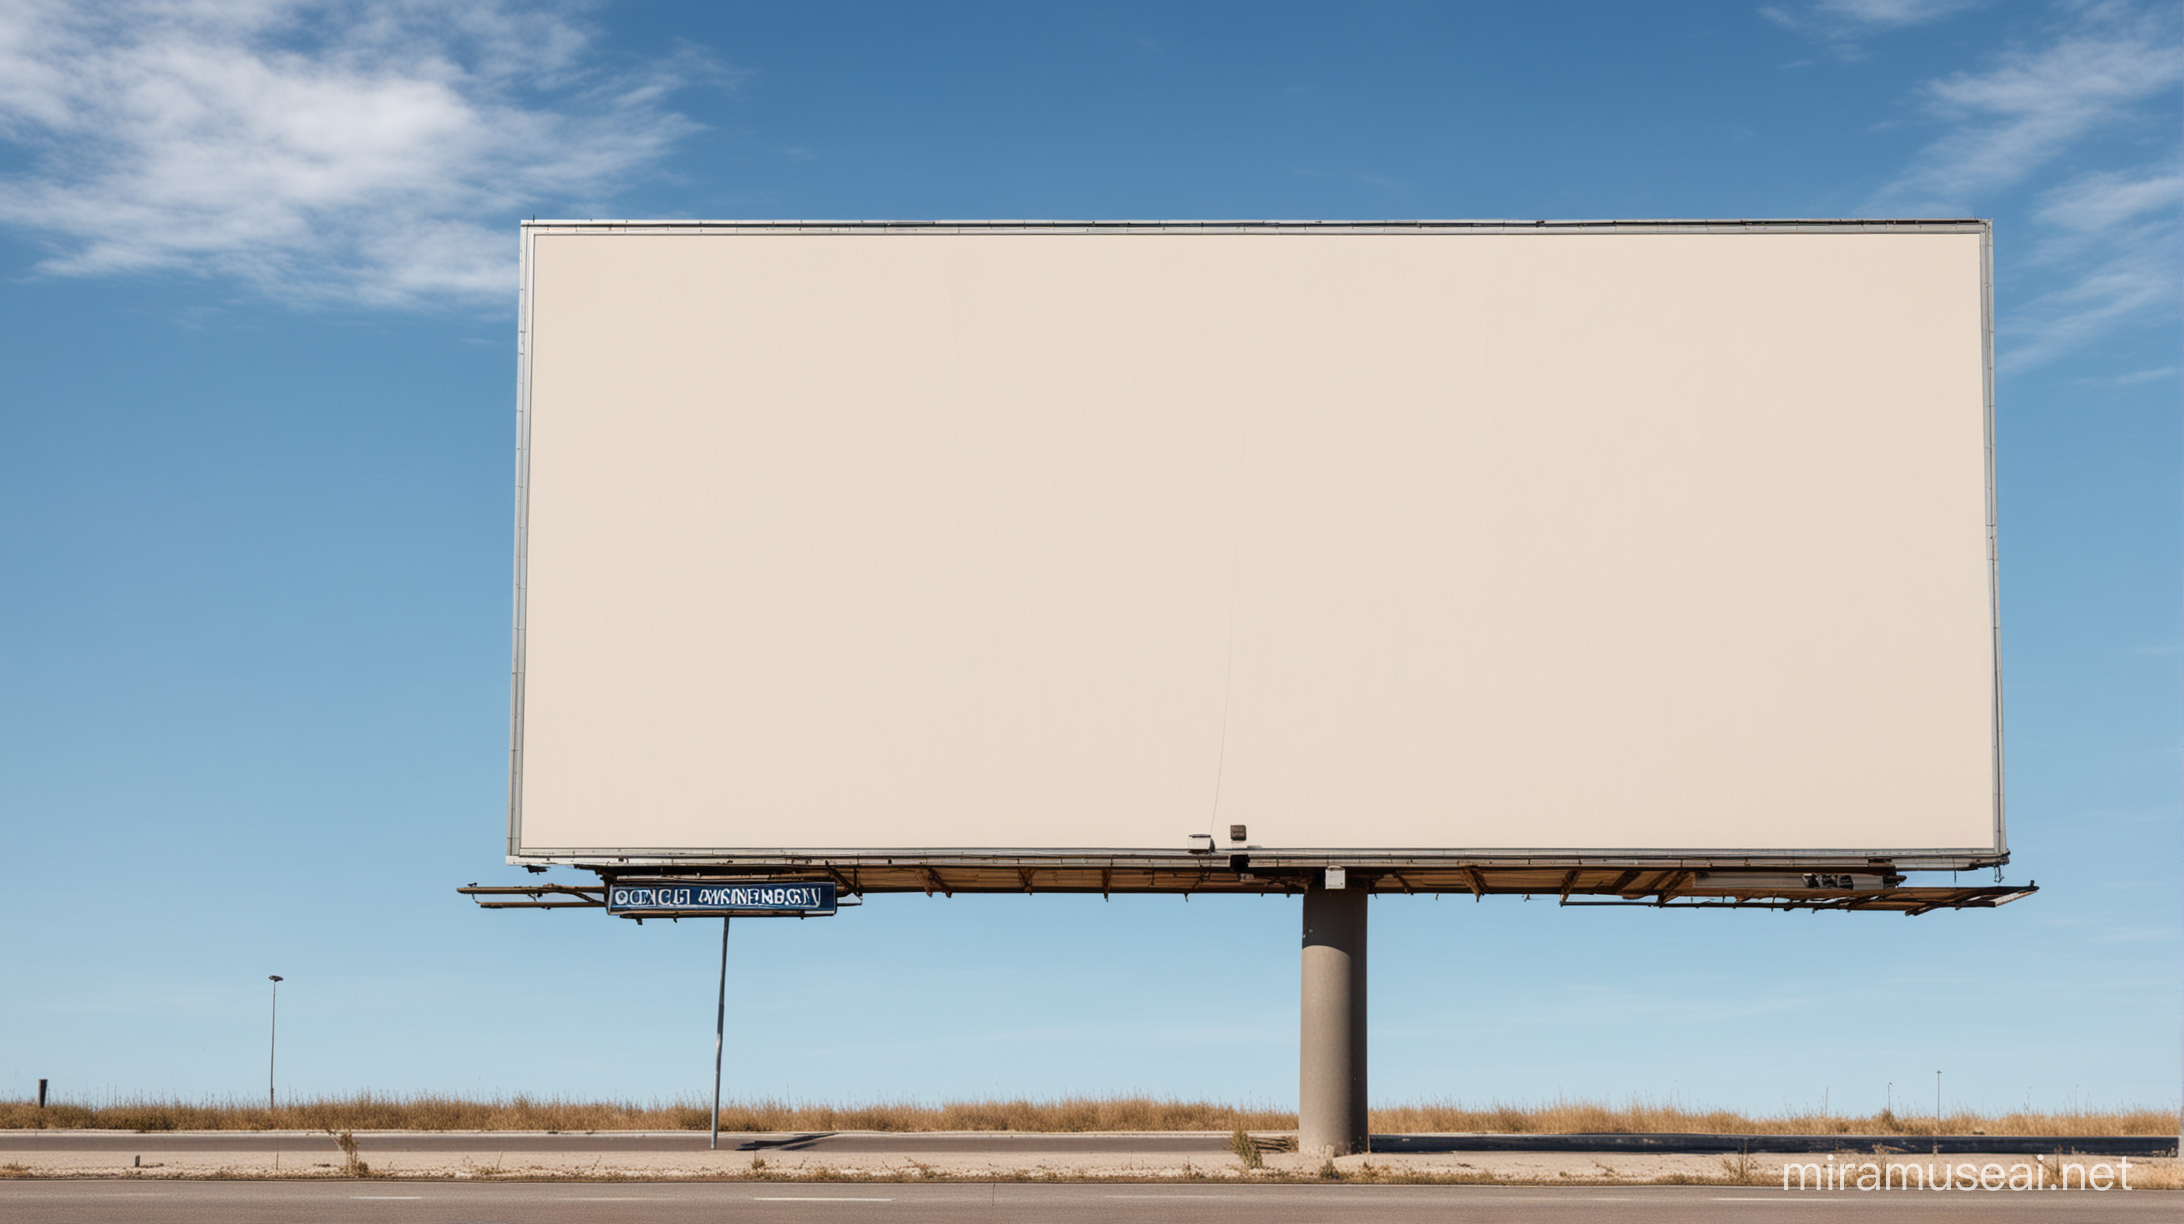 A blank billboard measuring 8x6 meters horizontally on the side of the road with a blue sky as a background